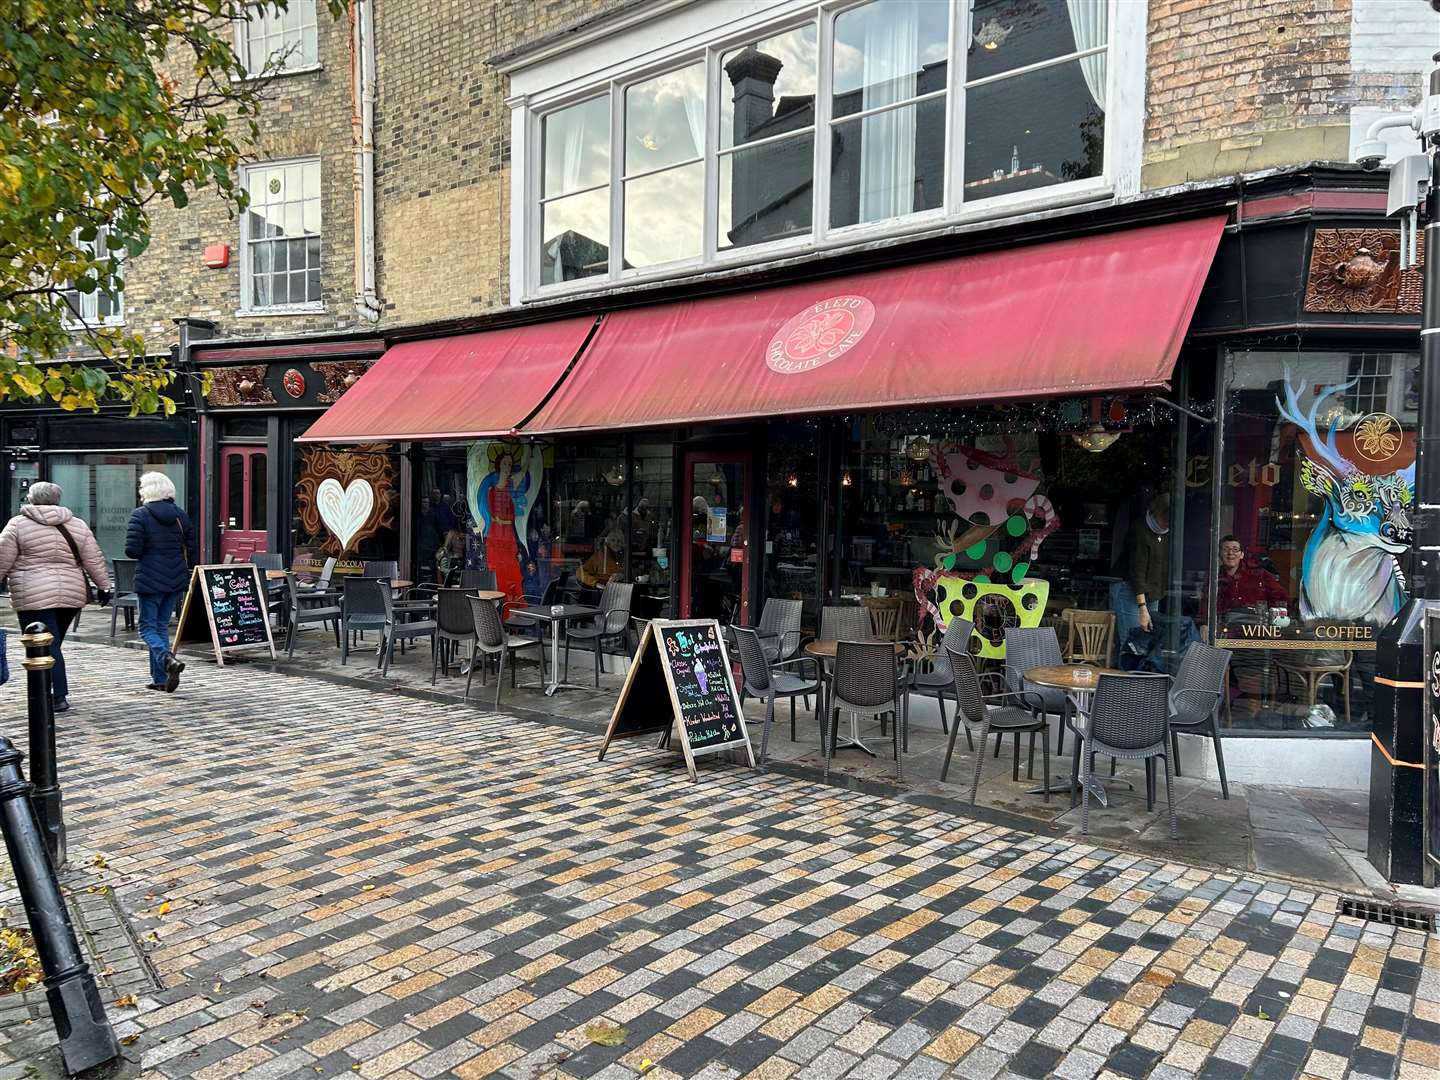 The Eleto Chocolate Cafe in Canterbury was given a two-star hygiene rating